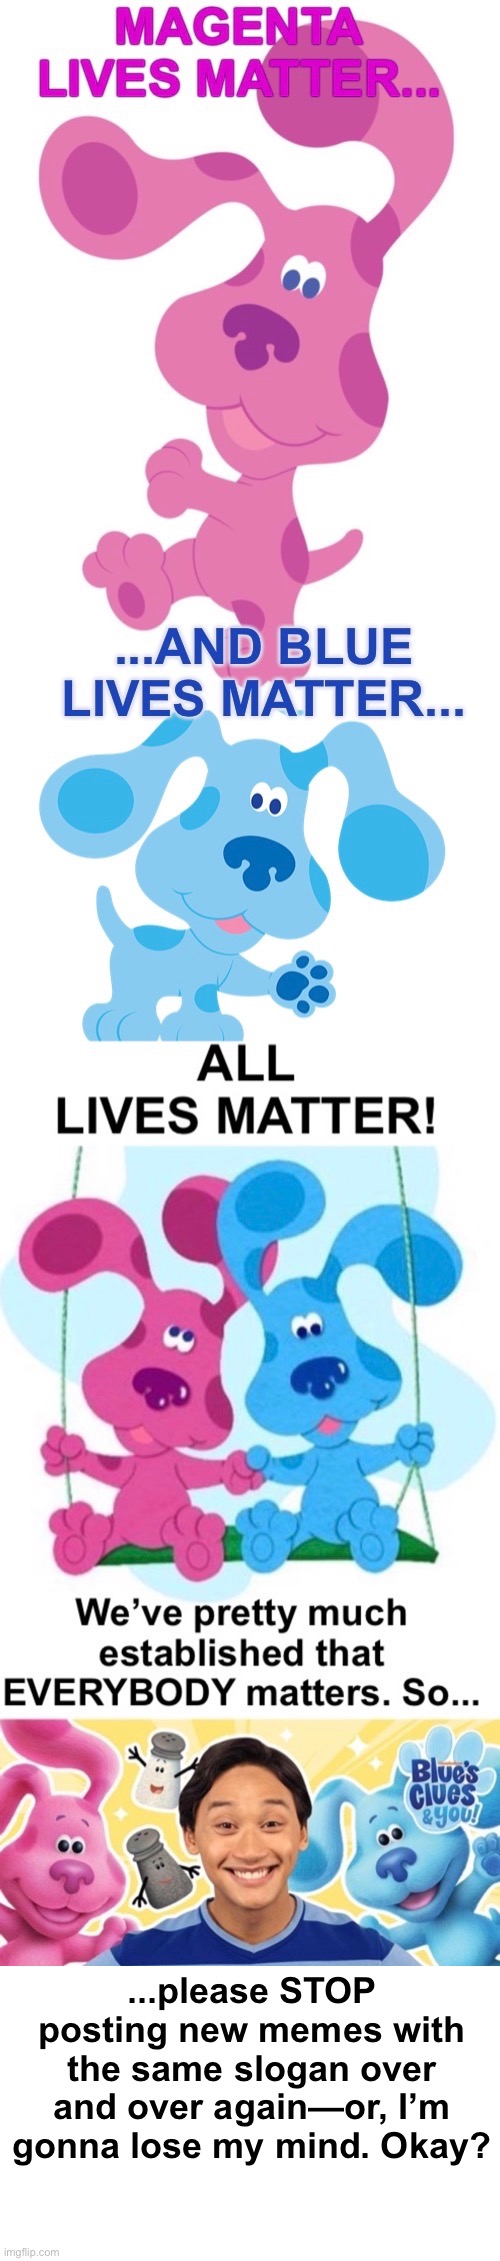 All Lives Matter. Got it! Always have. | ...please STOP posting new memes with the same slogan over and over again—or, I’m gonna lose my mind. Okay? | image tagged in funny meme | made w/ Imgflip meme maker